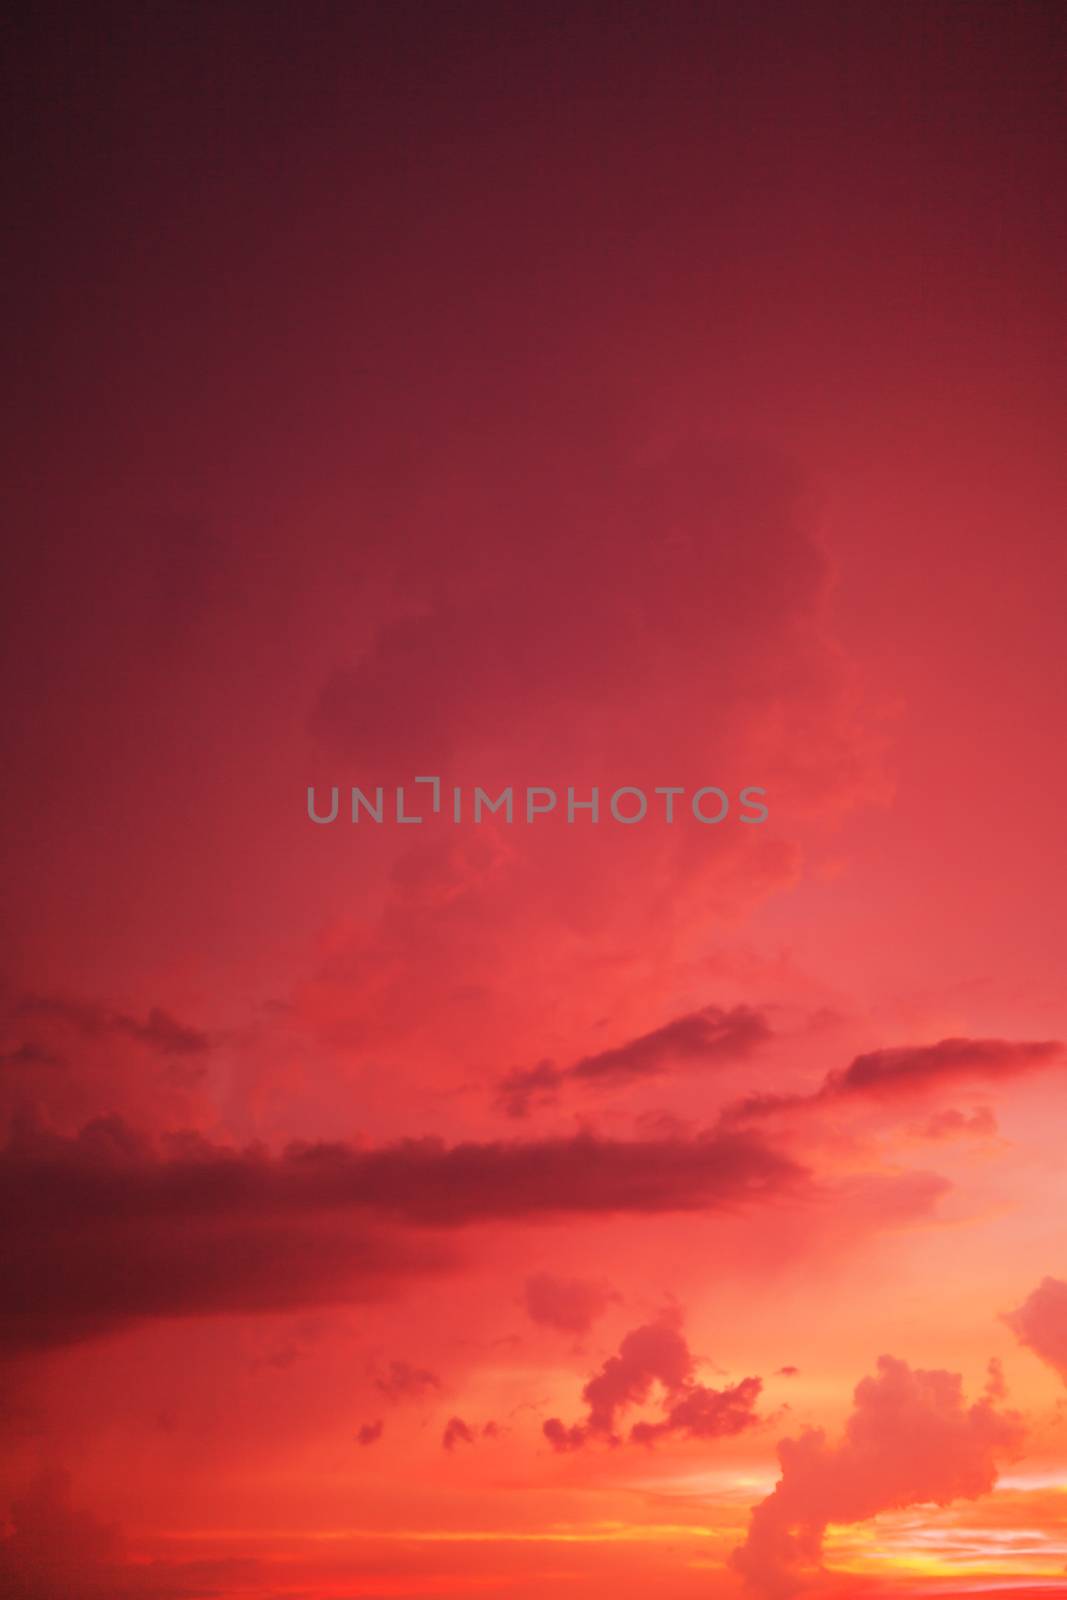 Dramatic red sunset sky with a fiery glow from the setting sun in a weather and nature full frame background, vertical orientation